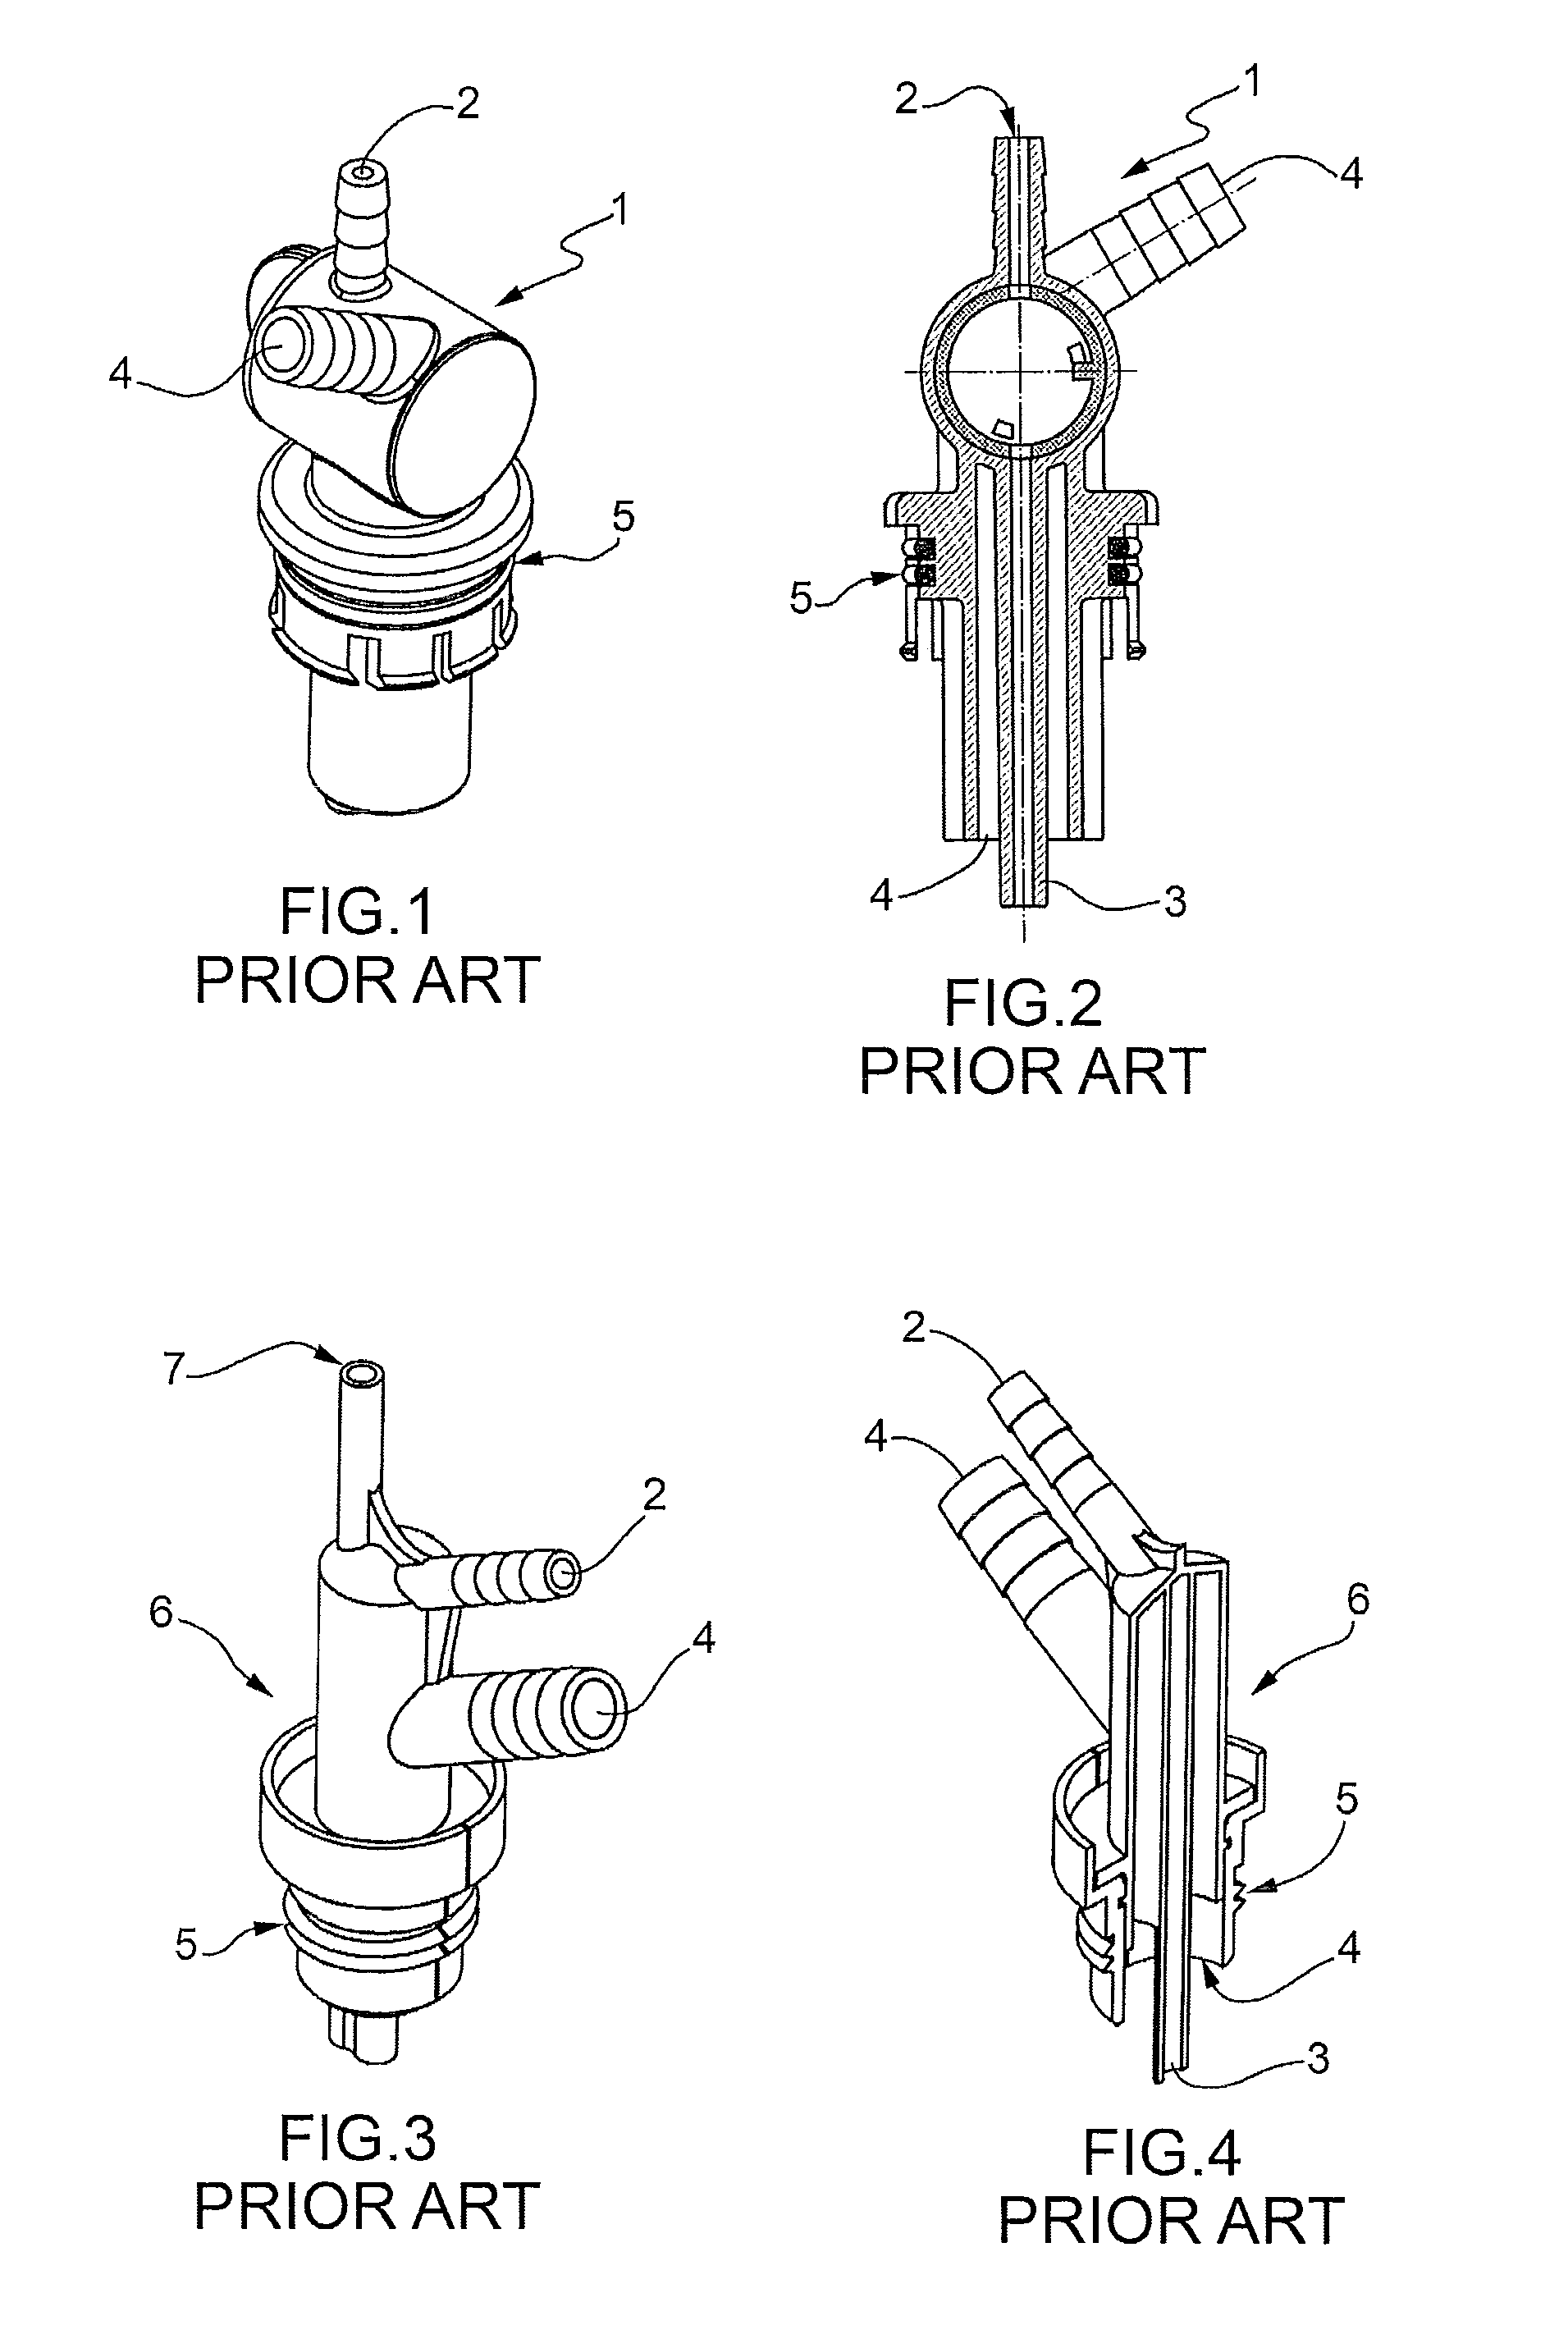 Plant for electrochemical forming of lead-acid batteries